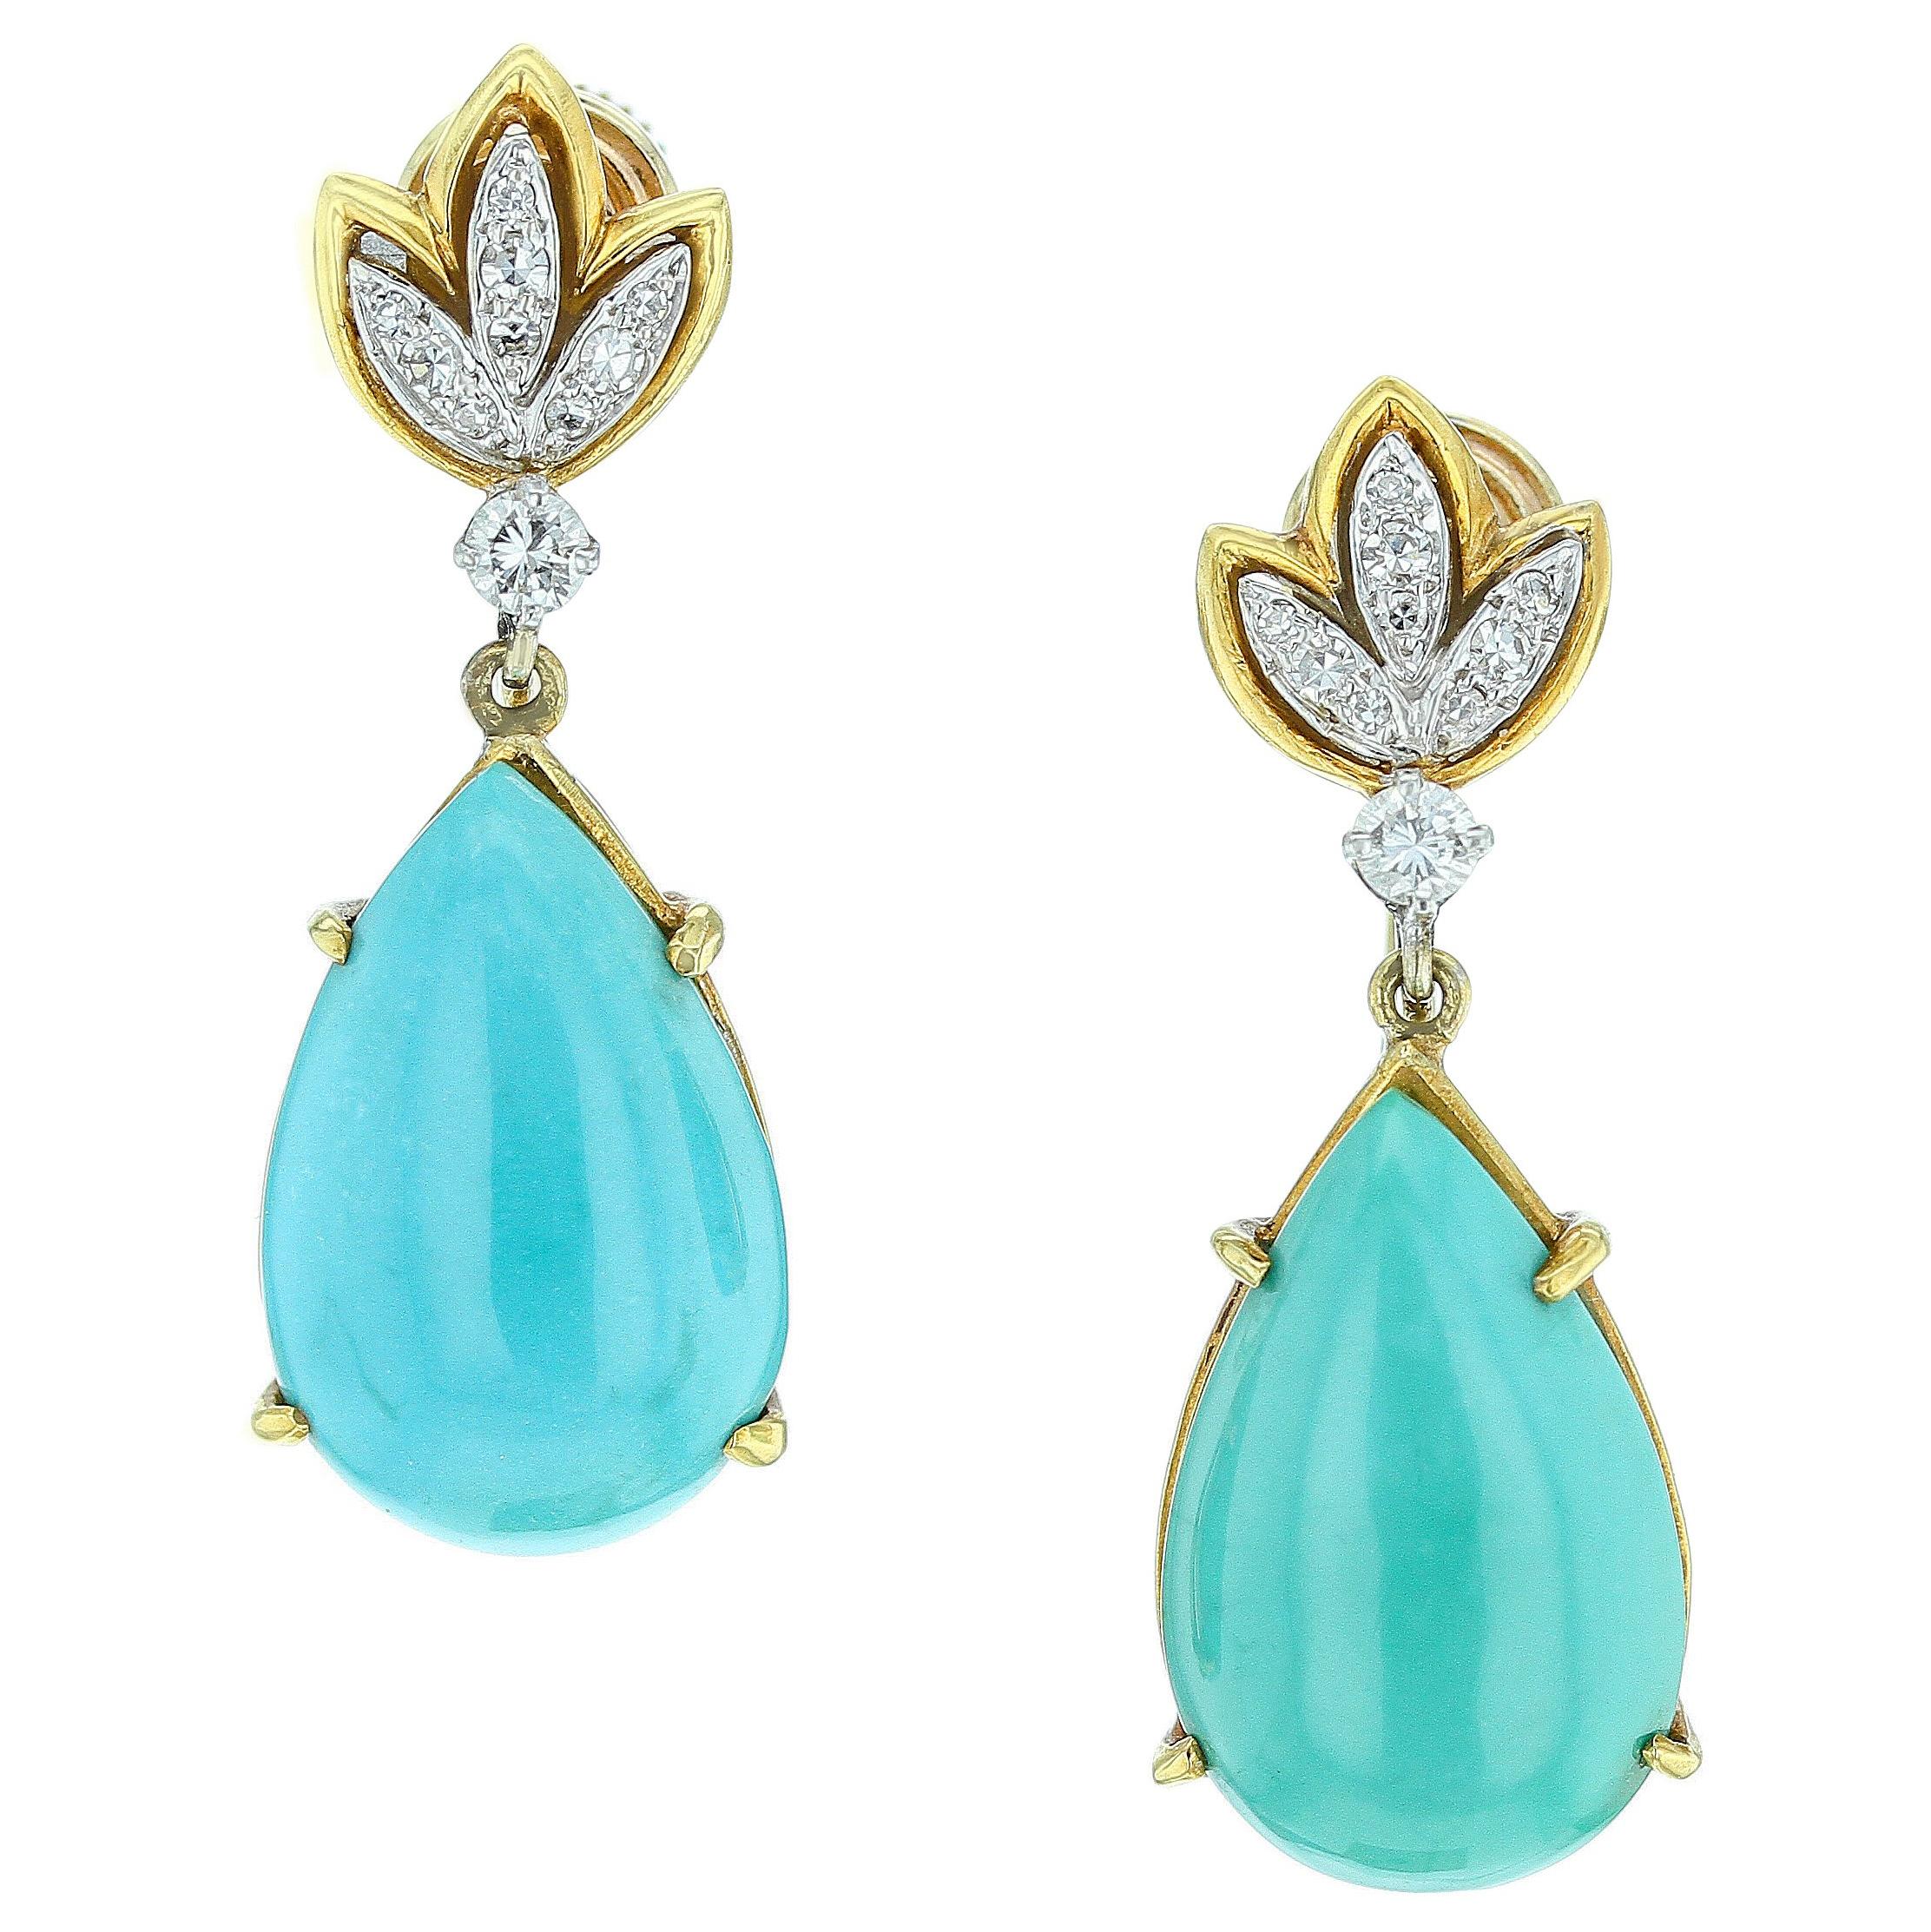 Tiffany & Co. Pear-Shape Turquoise and Diamond Earrings For Sale